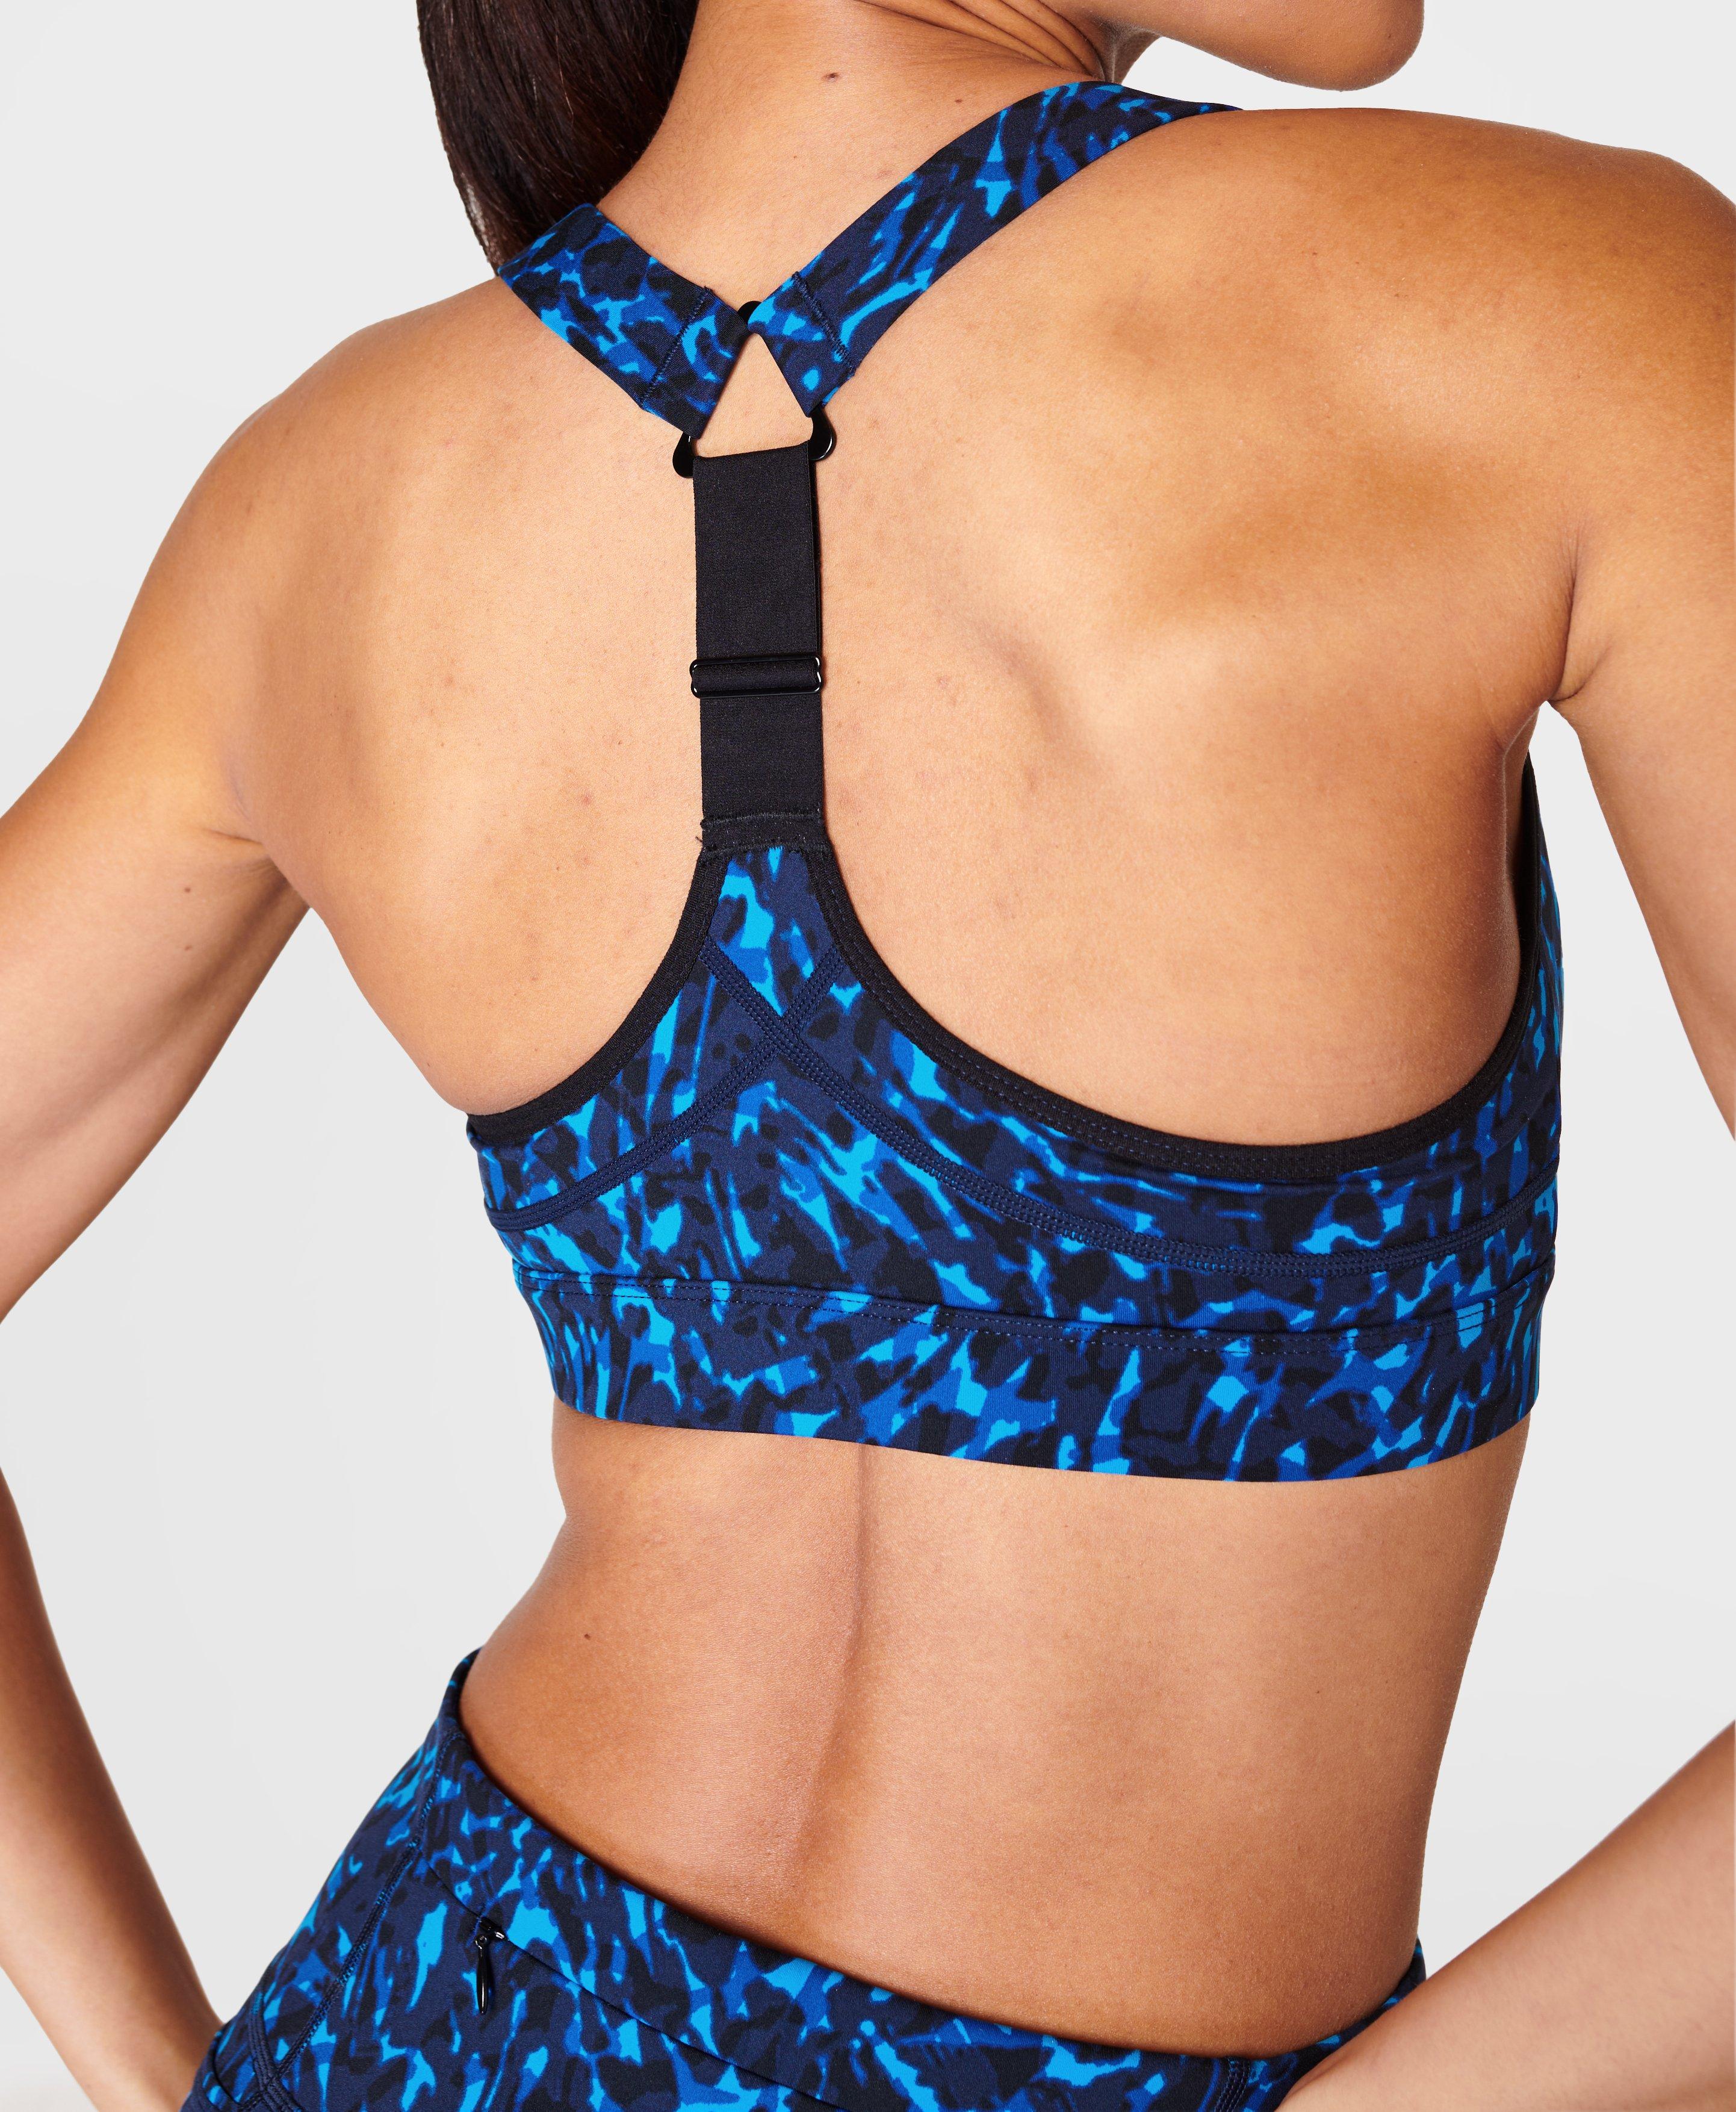 Fleet Feet Huntsville - NEW bras from Oiselle are here! Pockets, comfort,  no-slip support, coverage + super cute colors are all musts, when  considering a sports bra. Need help with finding a